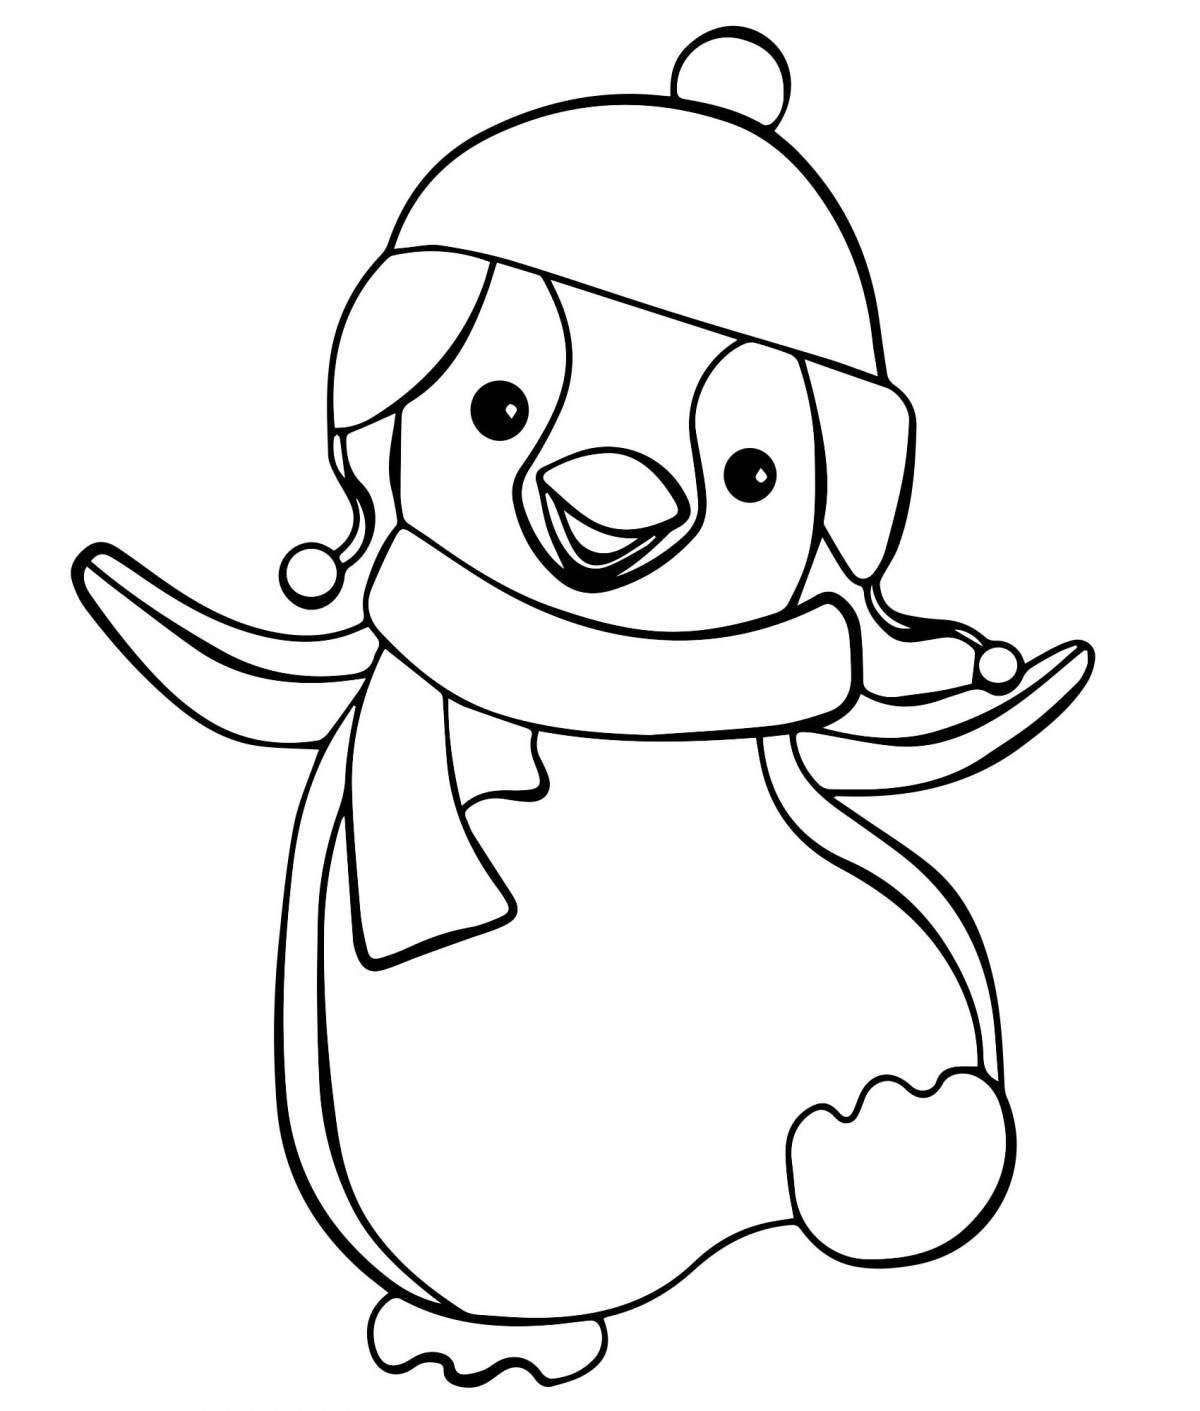 Rampant penguin coloring page